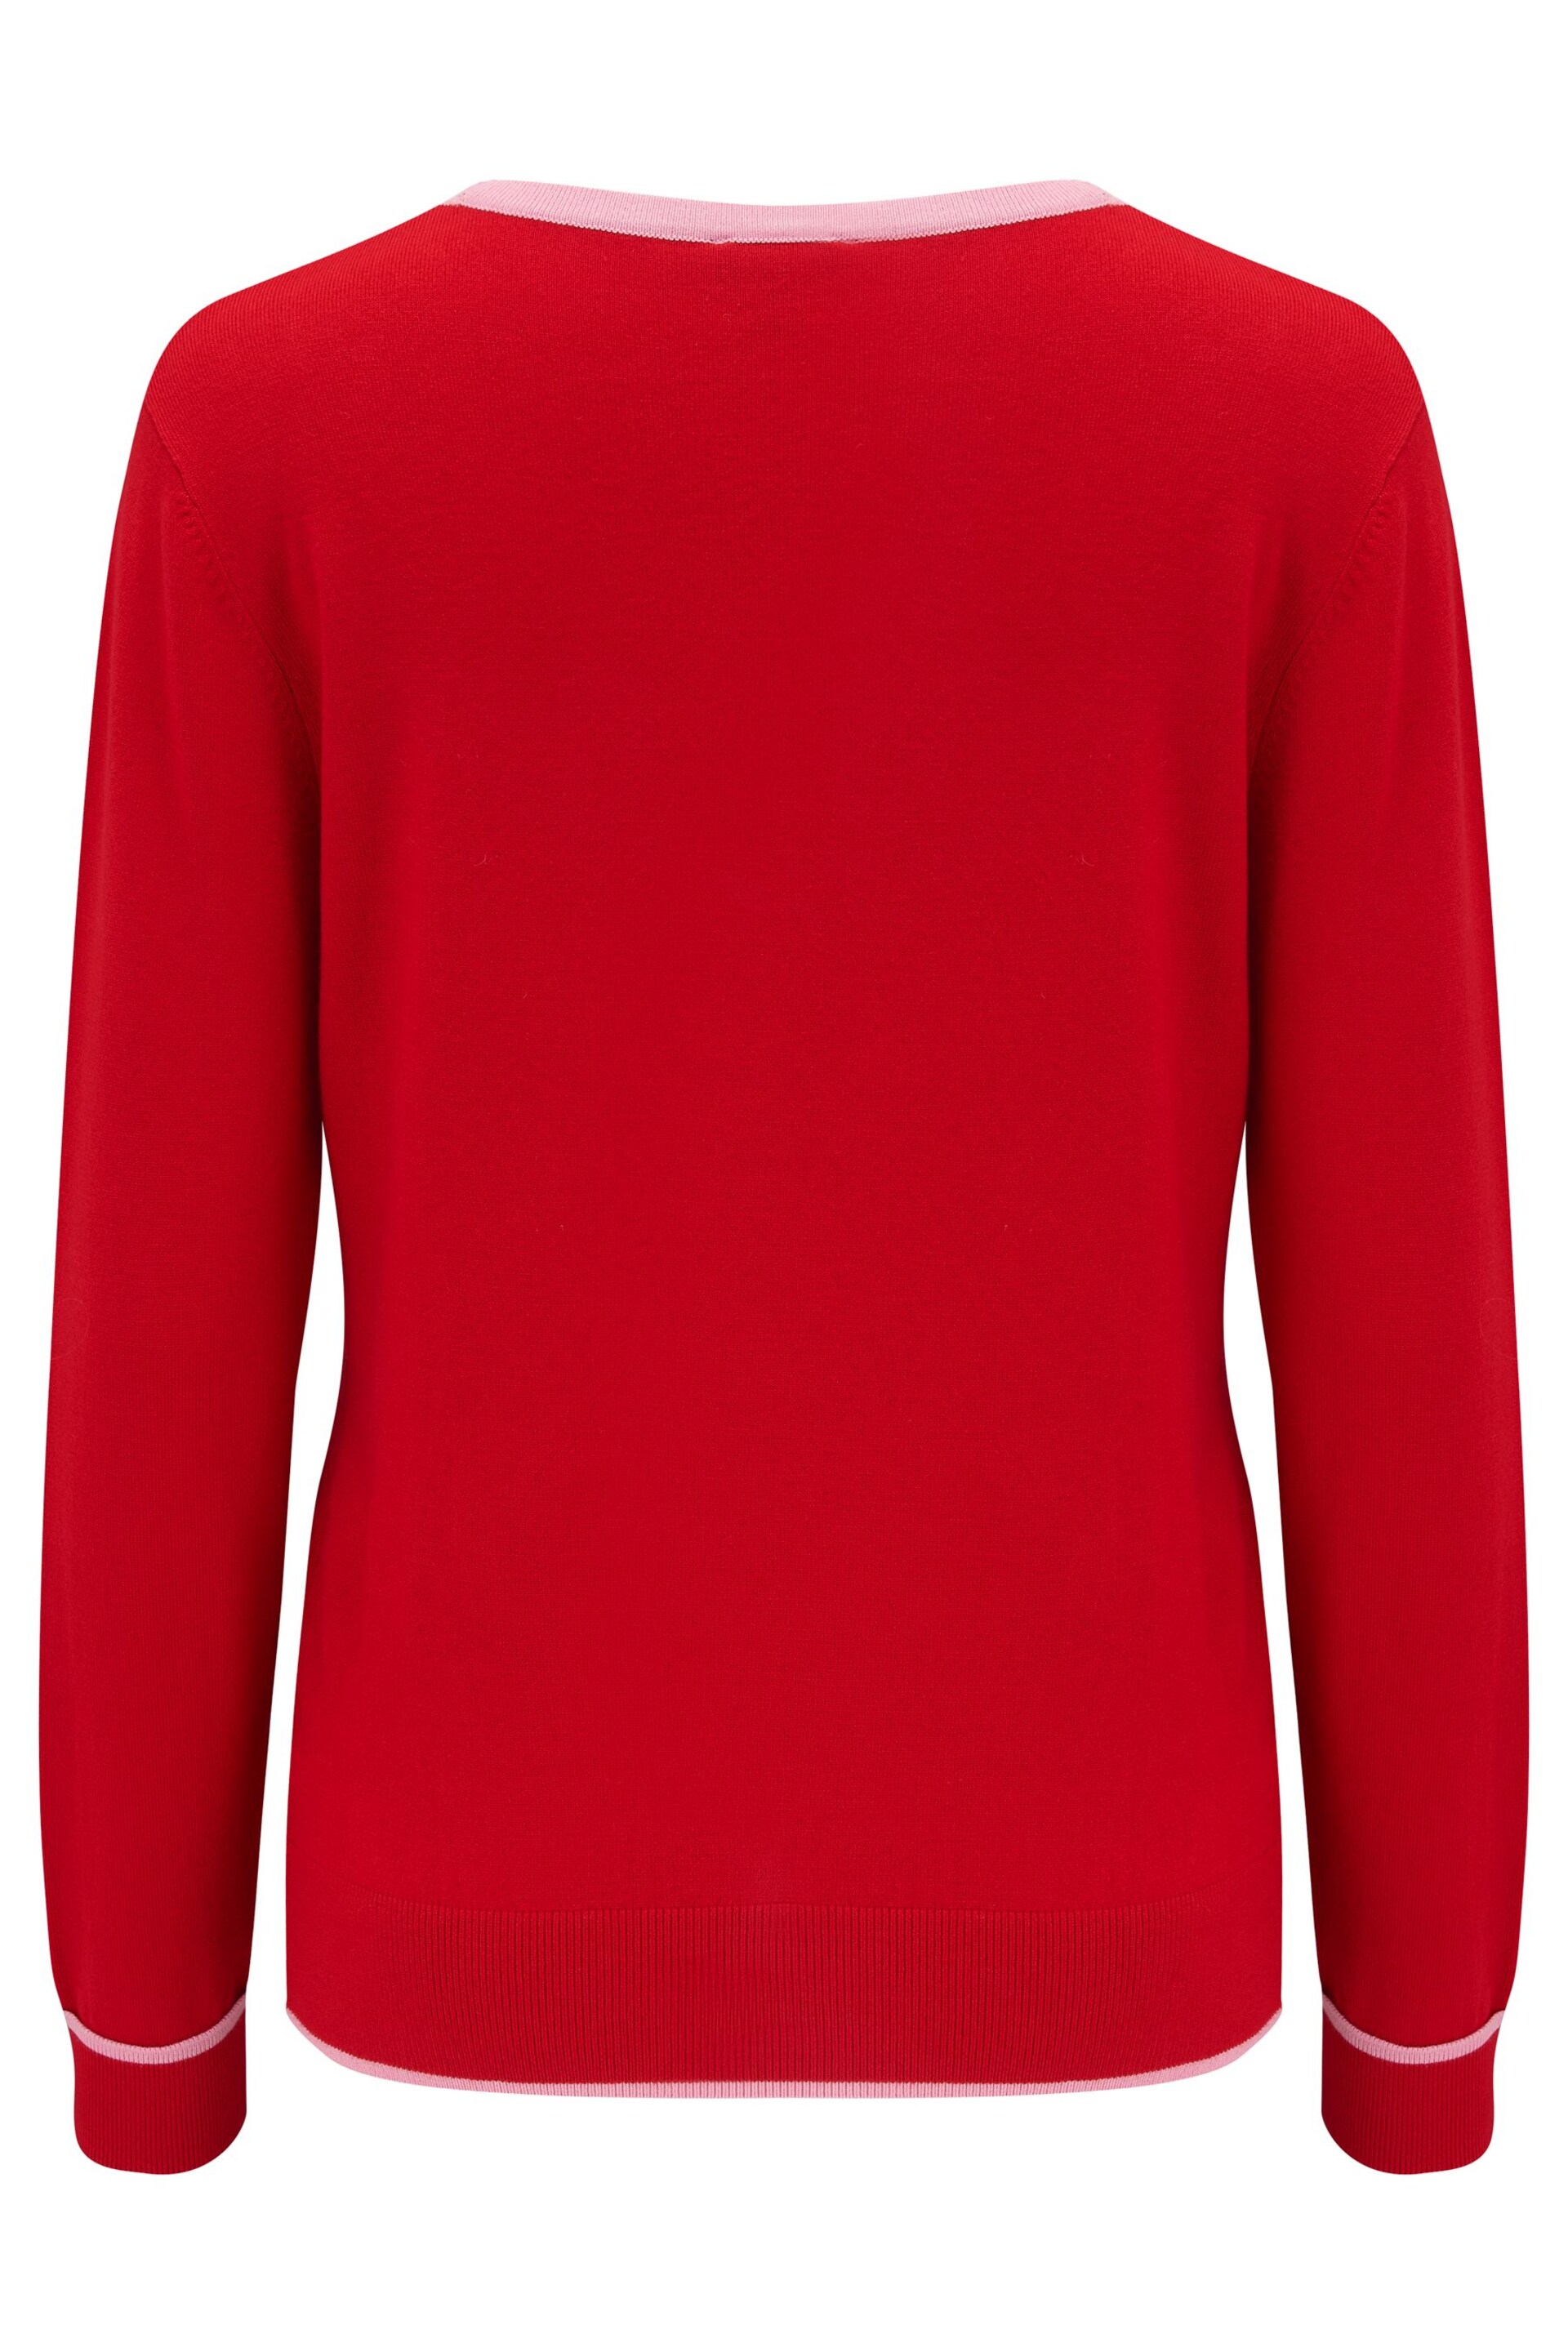 Pour Moi Red Rosie Colour Block Knit Jumper with LENZING™ ECOVERO™ Viscose - Image 5 of 5